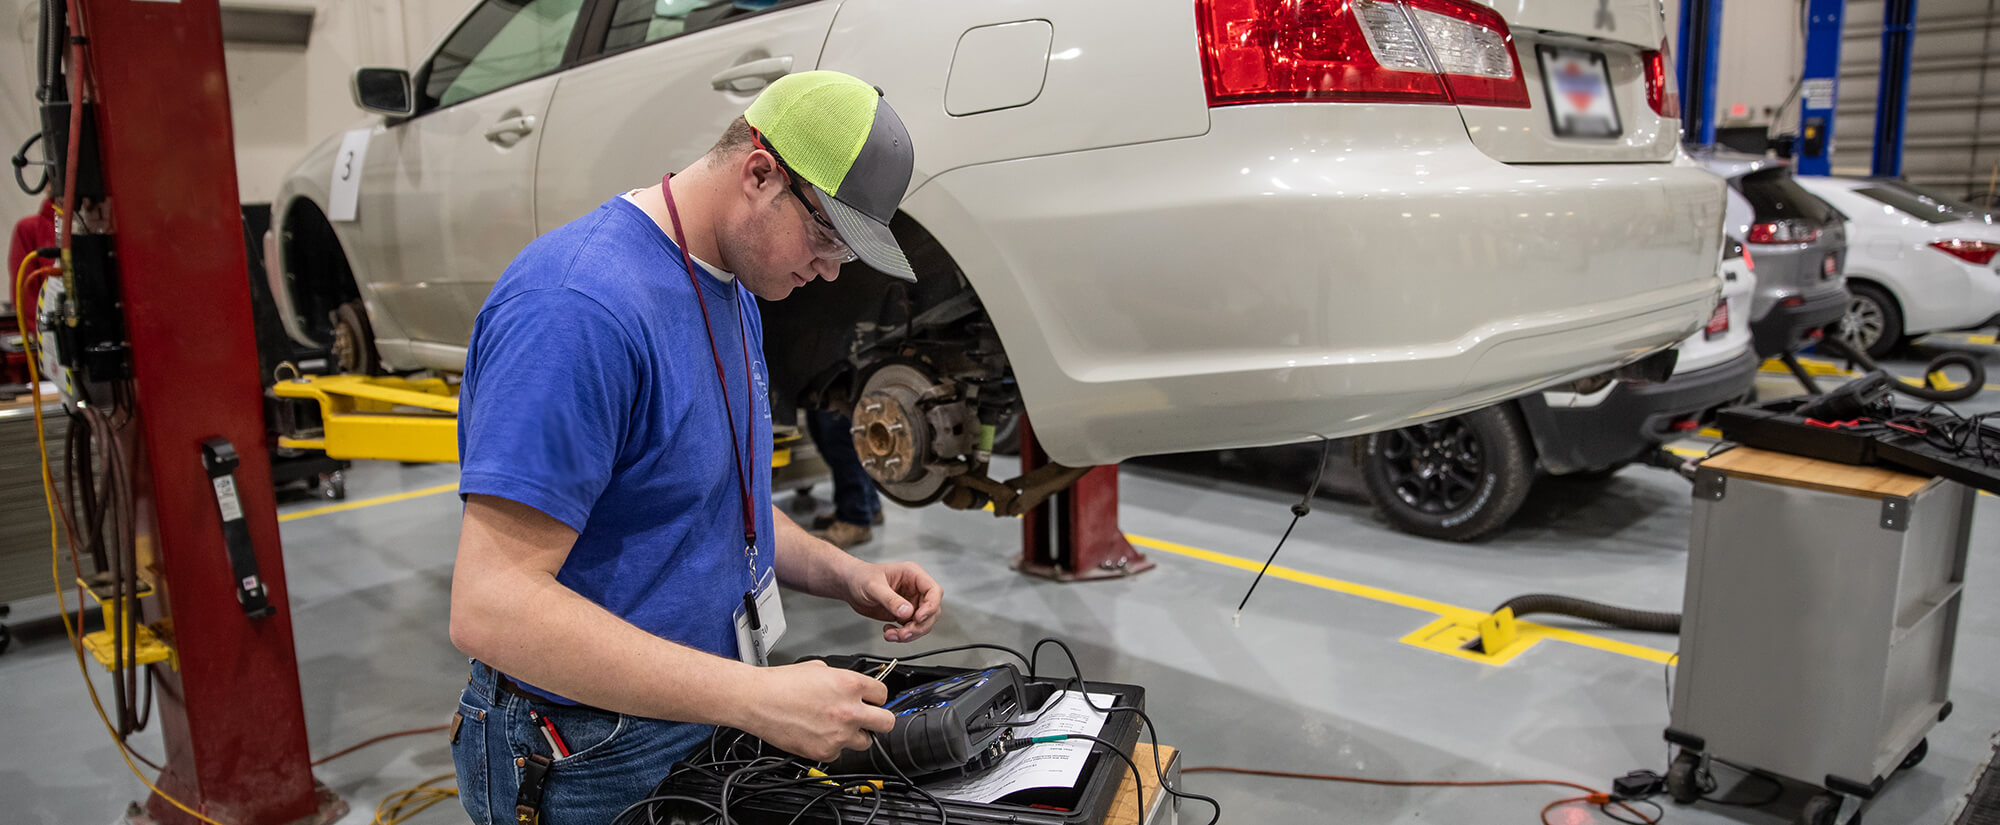 Photo of college student working on a small computer attached to a car that is on jacks.